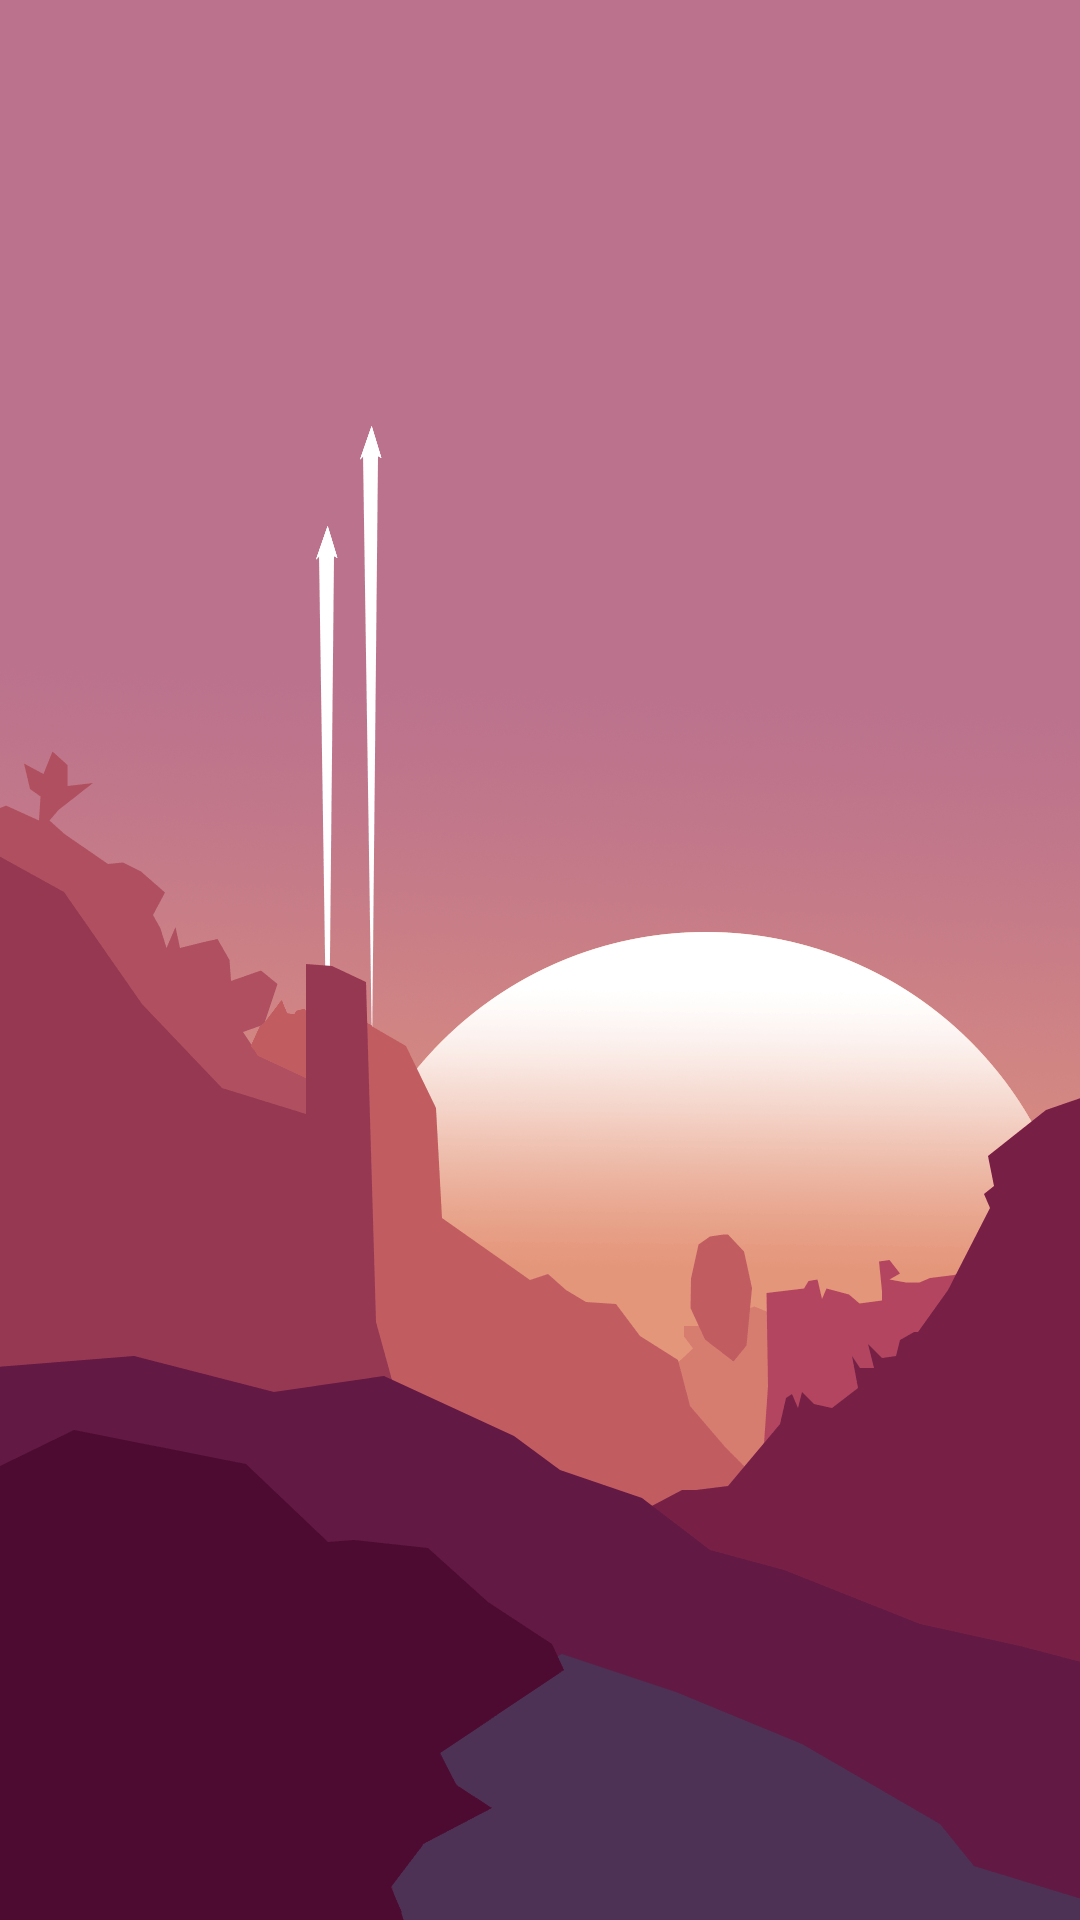 created a minimalist no mans sky phone wallpaper based on a planet